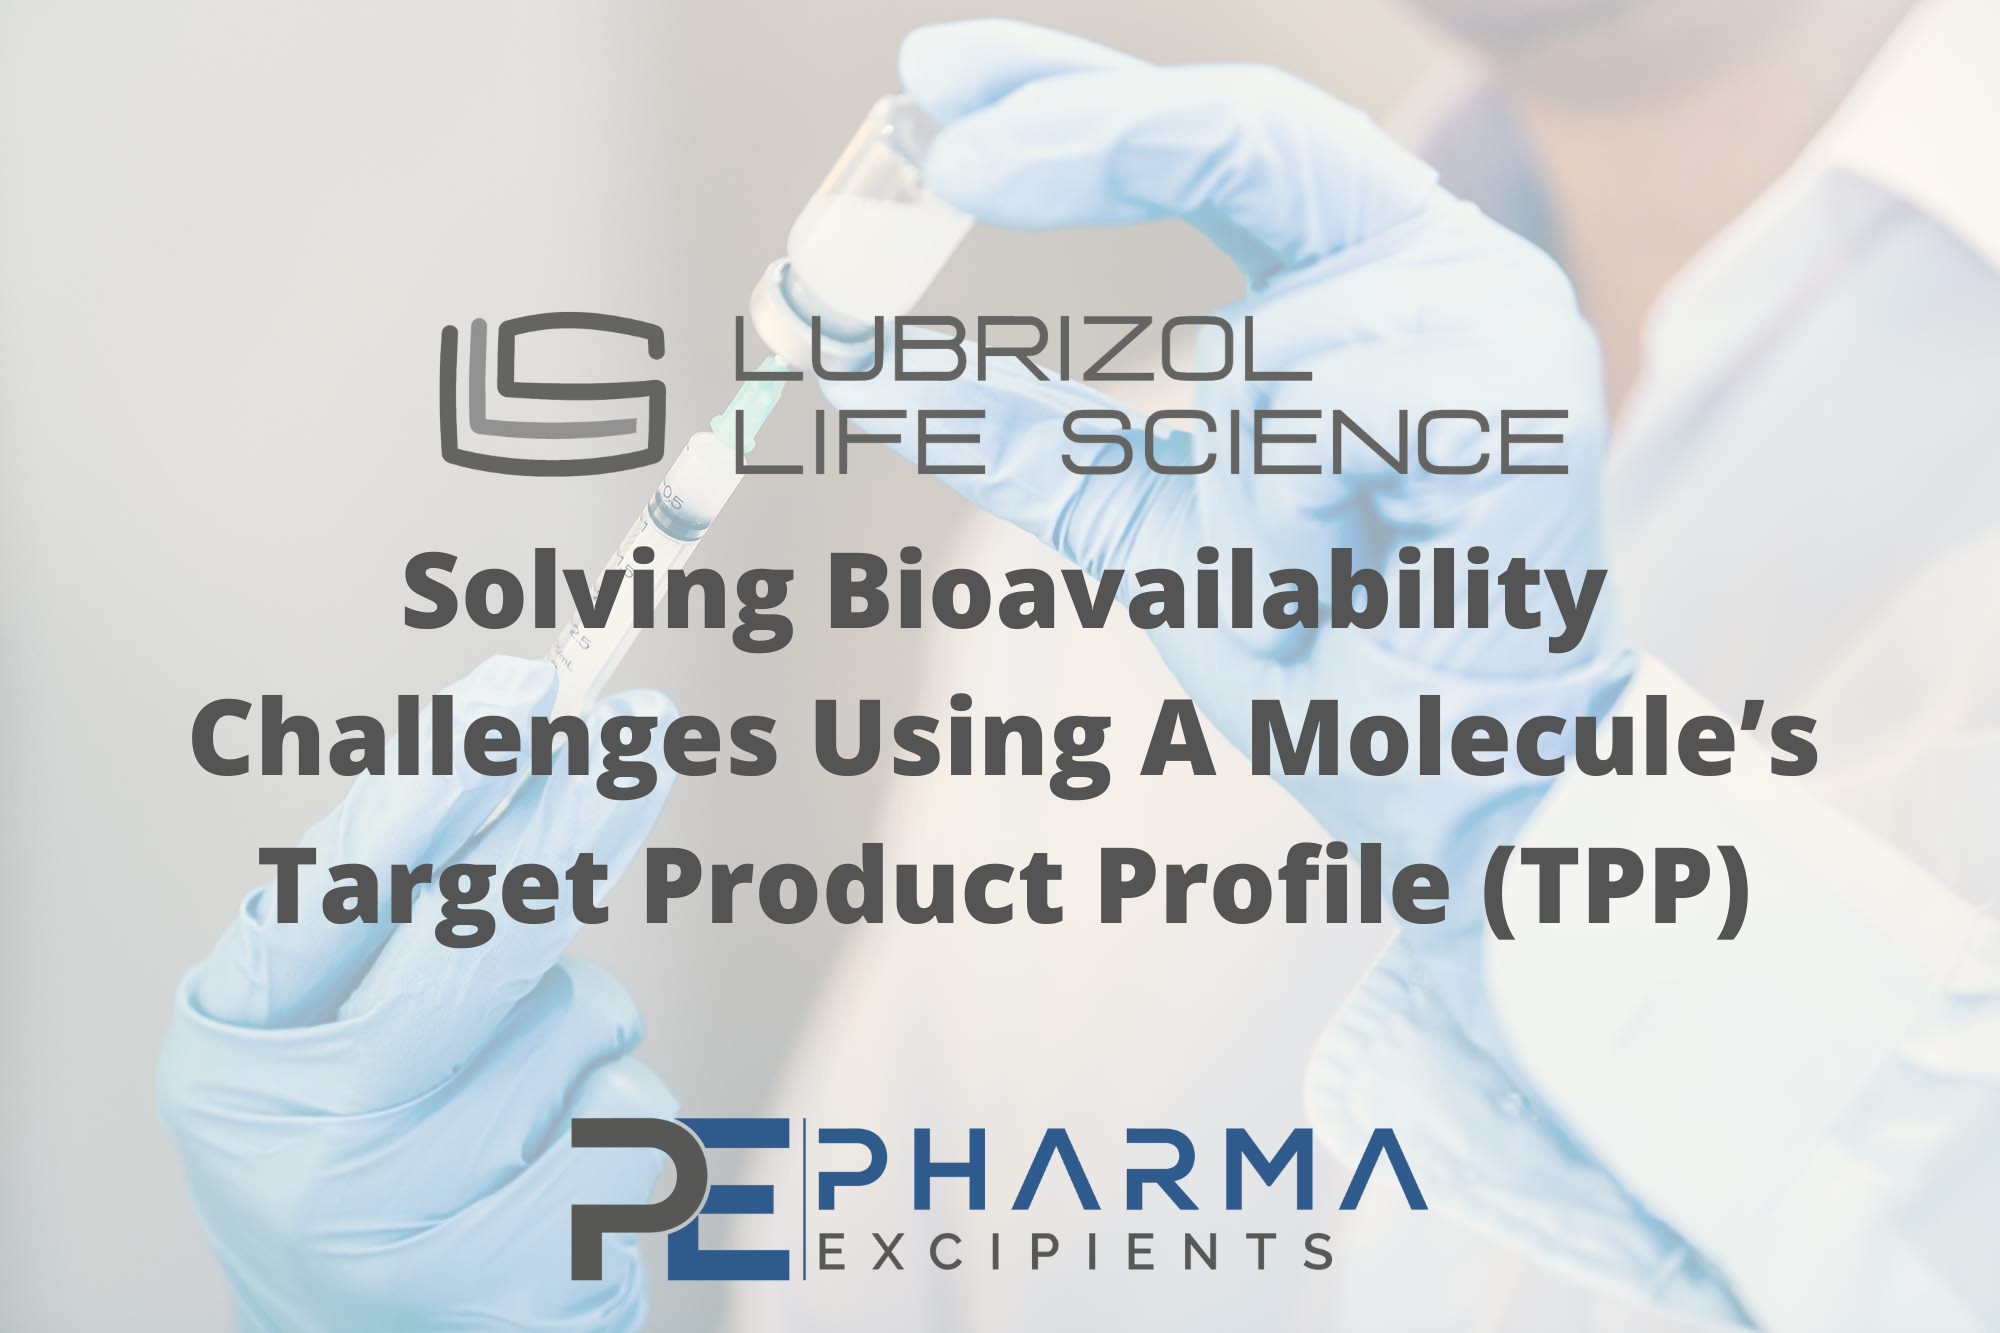 Solving Bioavailability Challenges Using A Molecule’s Target Product Profile (TPP)